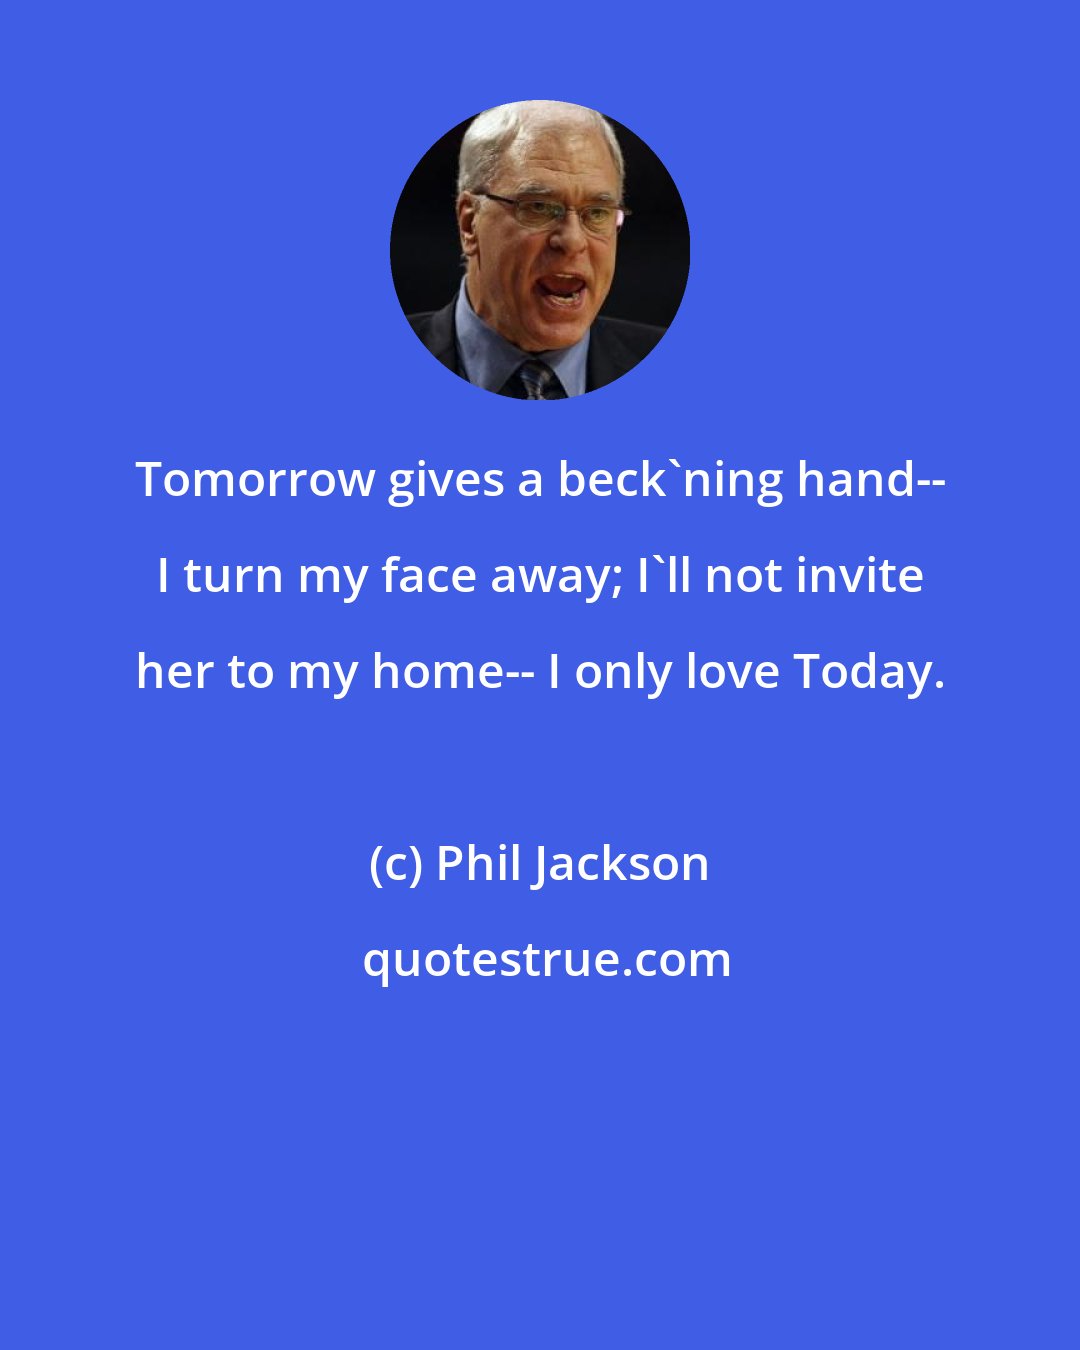 Phil Jackson: Tomorrow gives a beck'ning hand-- I turn my face away; I'll not invite her to my home-- I only love Today.